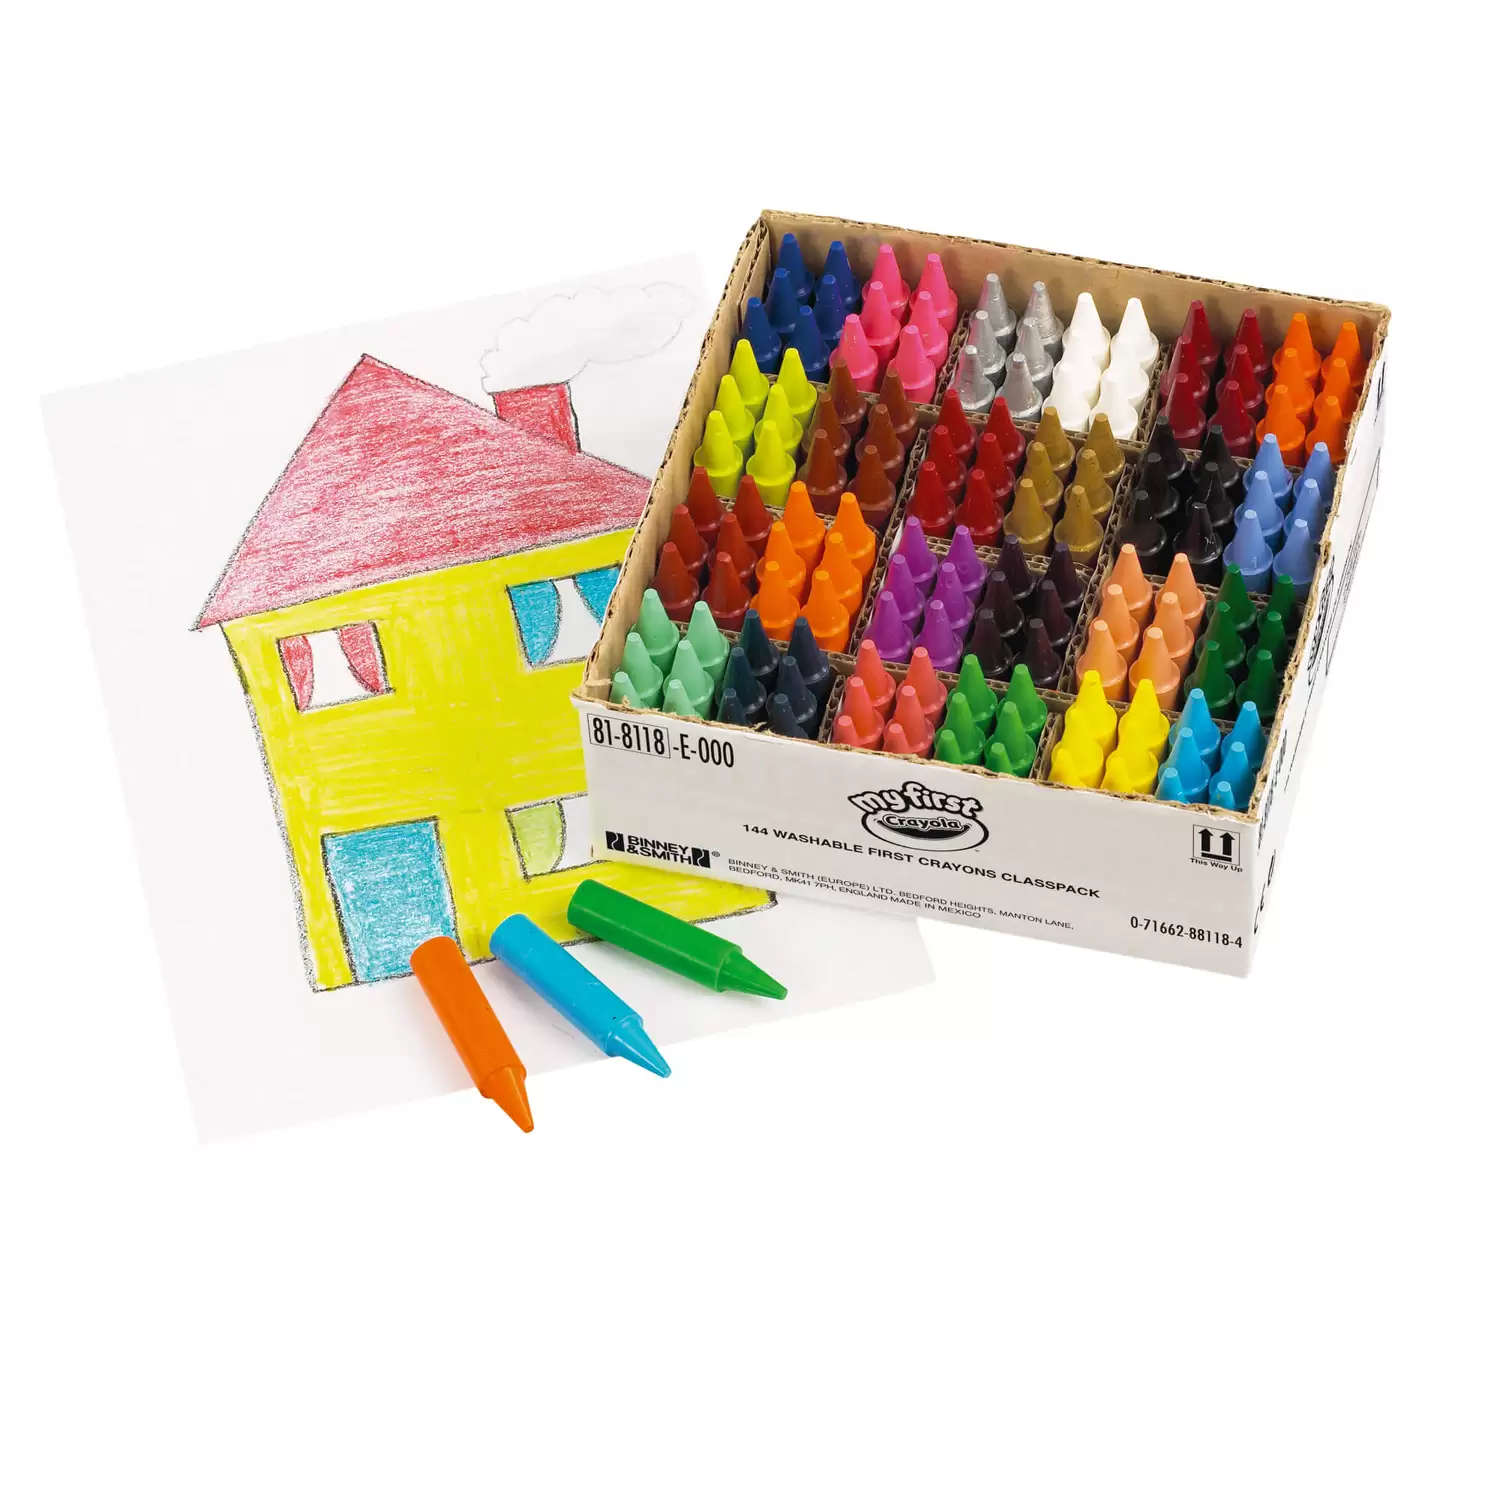 Crayola My First Crayon Classpack 144 - Gompels - Care & Nursery Supply  Specialists